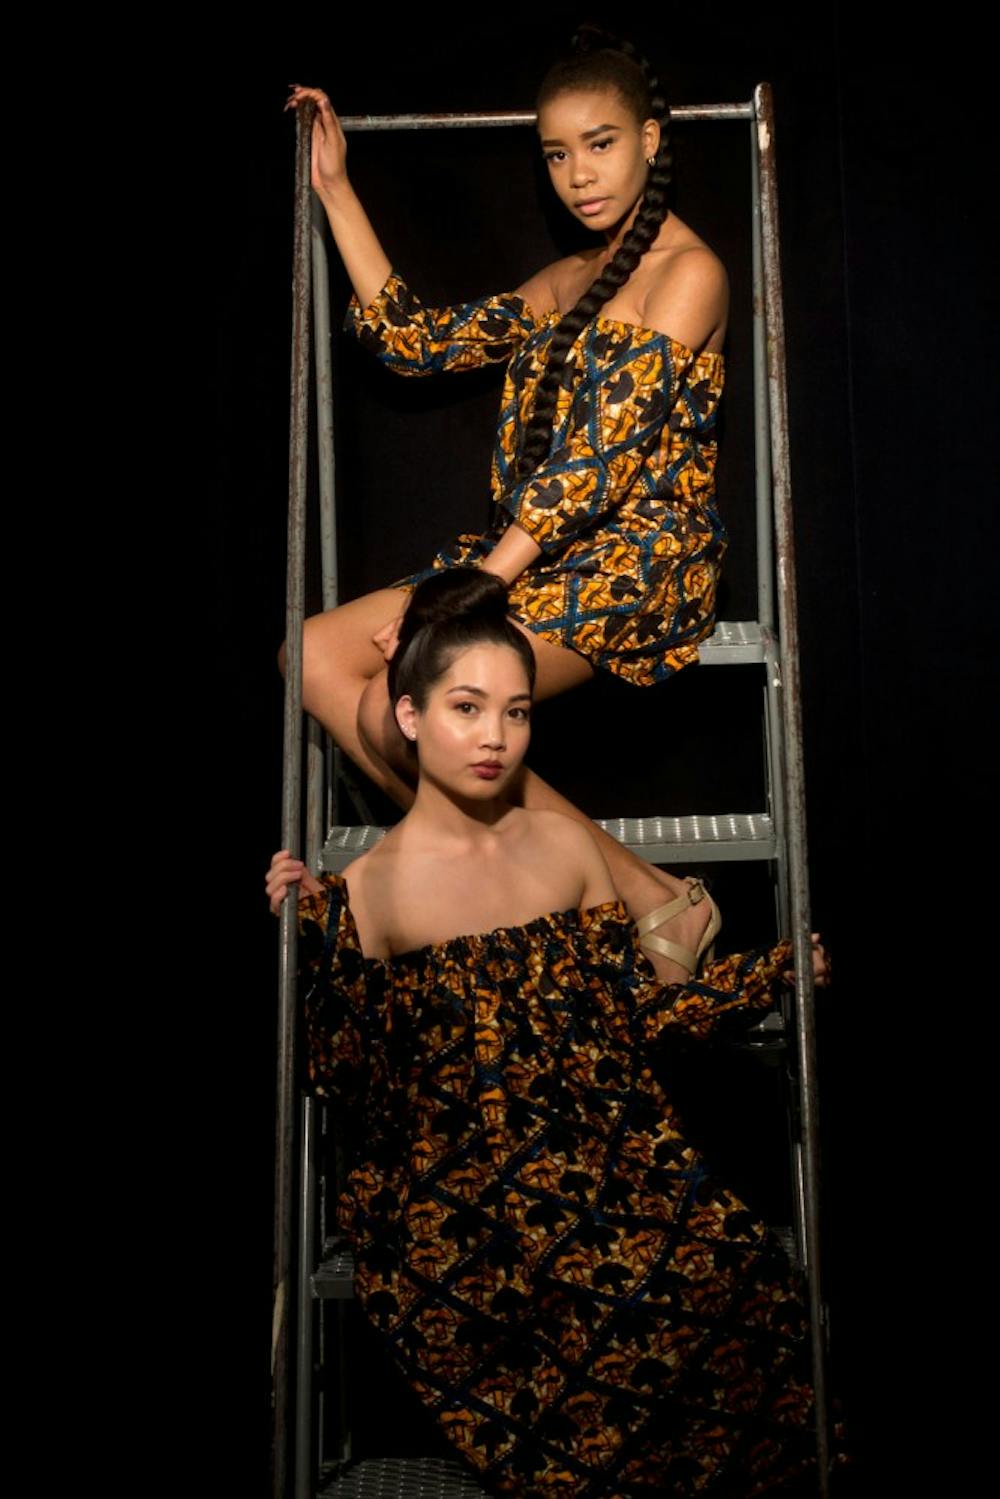 <p>Models wear clothing from KOJ Designs, a line created by Keji Omoboni Jones. The designer was featured in last year's ASA fashion show and won SUNY Oswego's "Battle of the Designers" on April 7.</p>